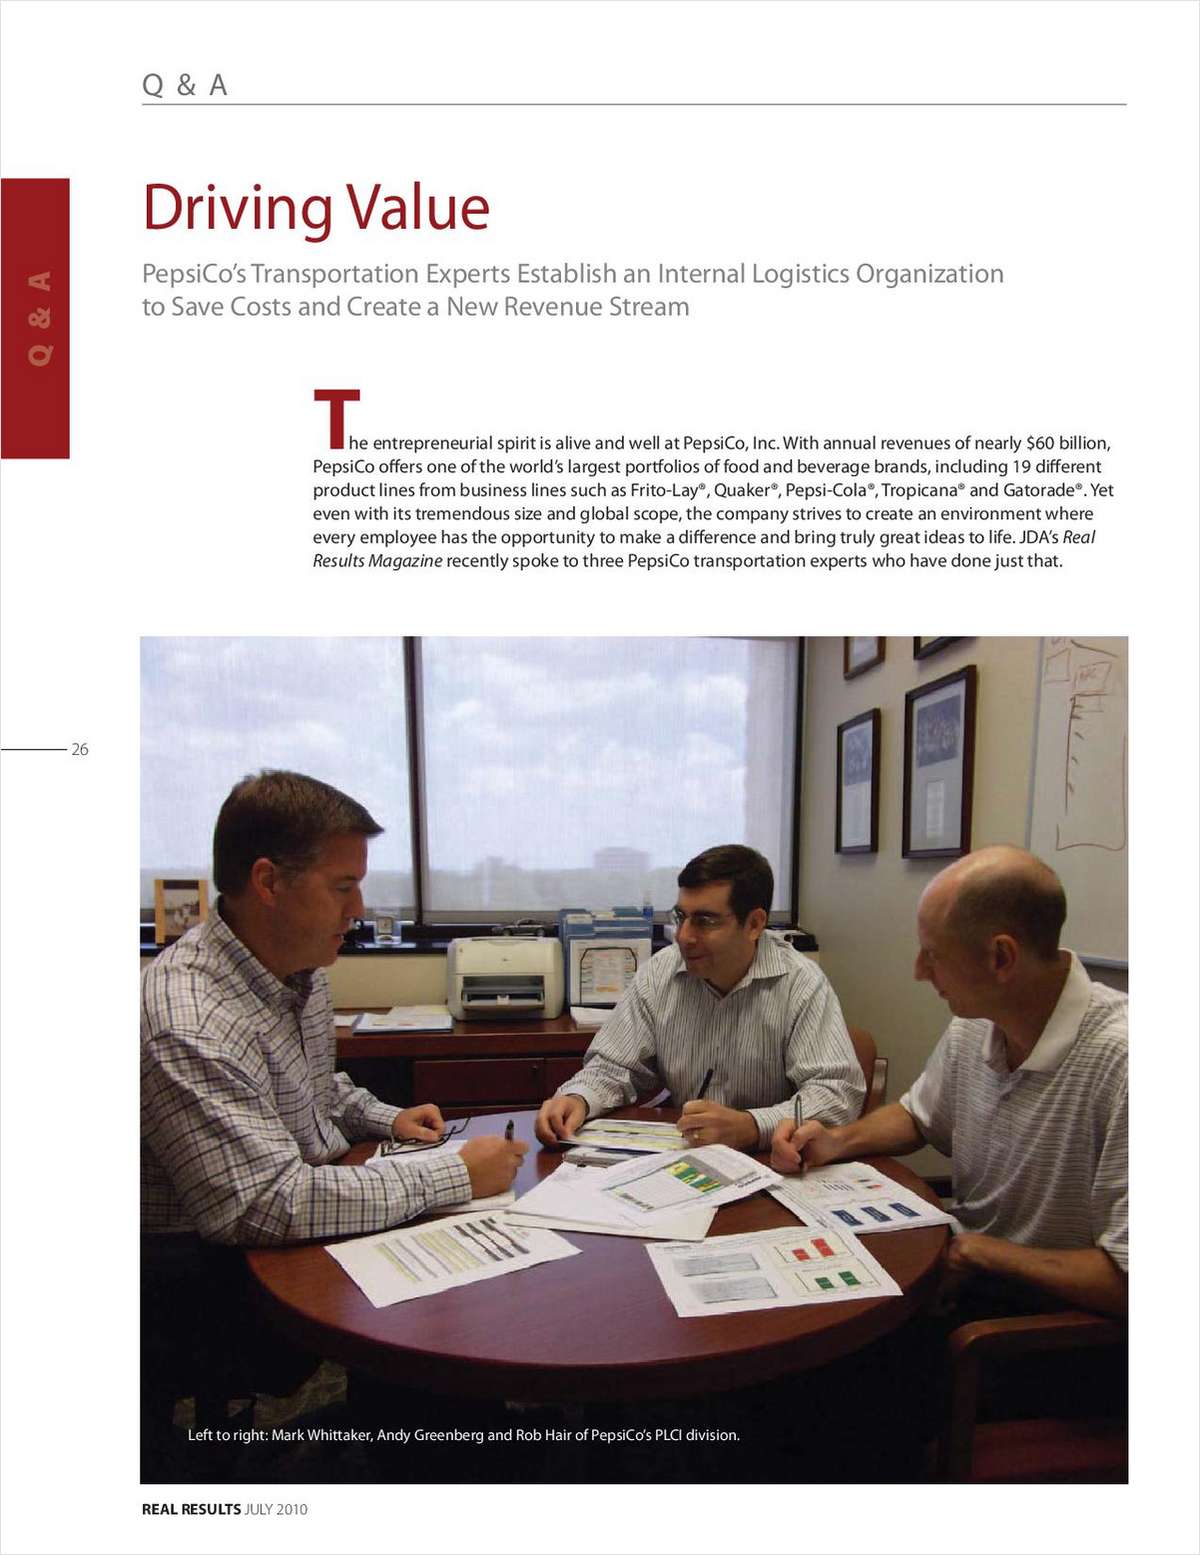 Driving Value